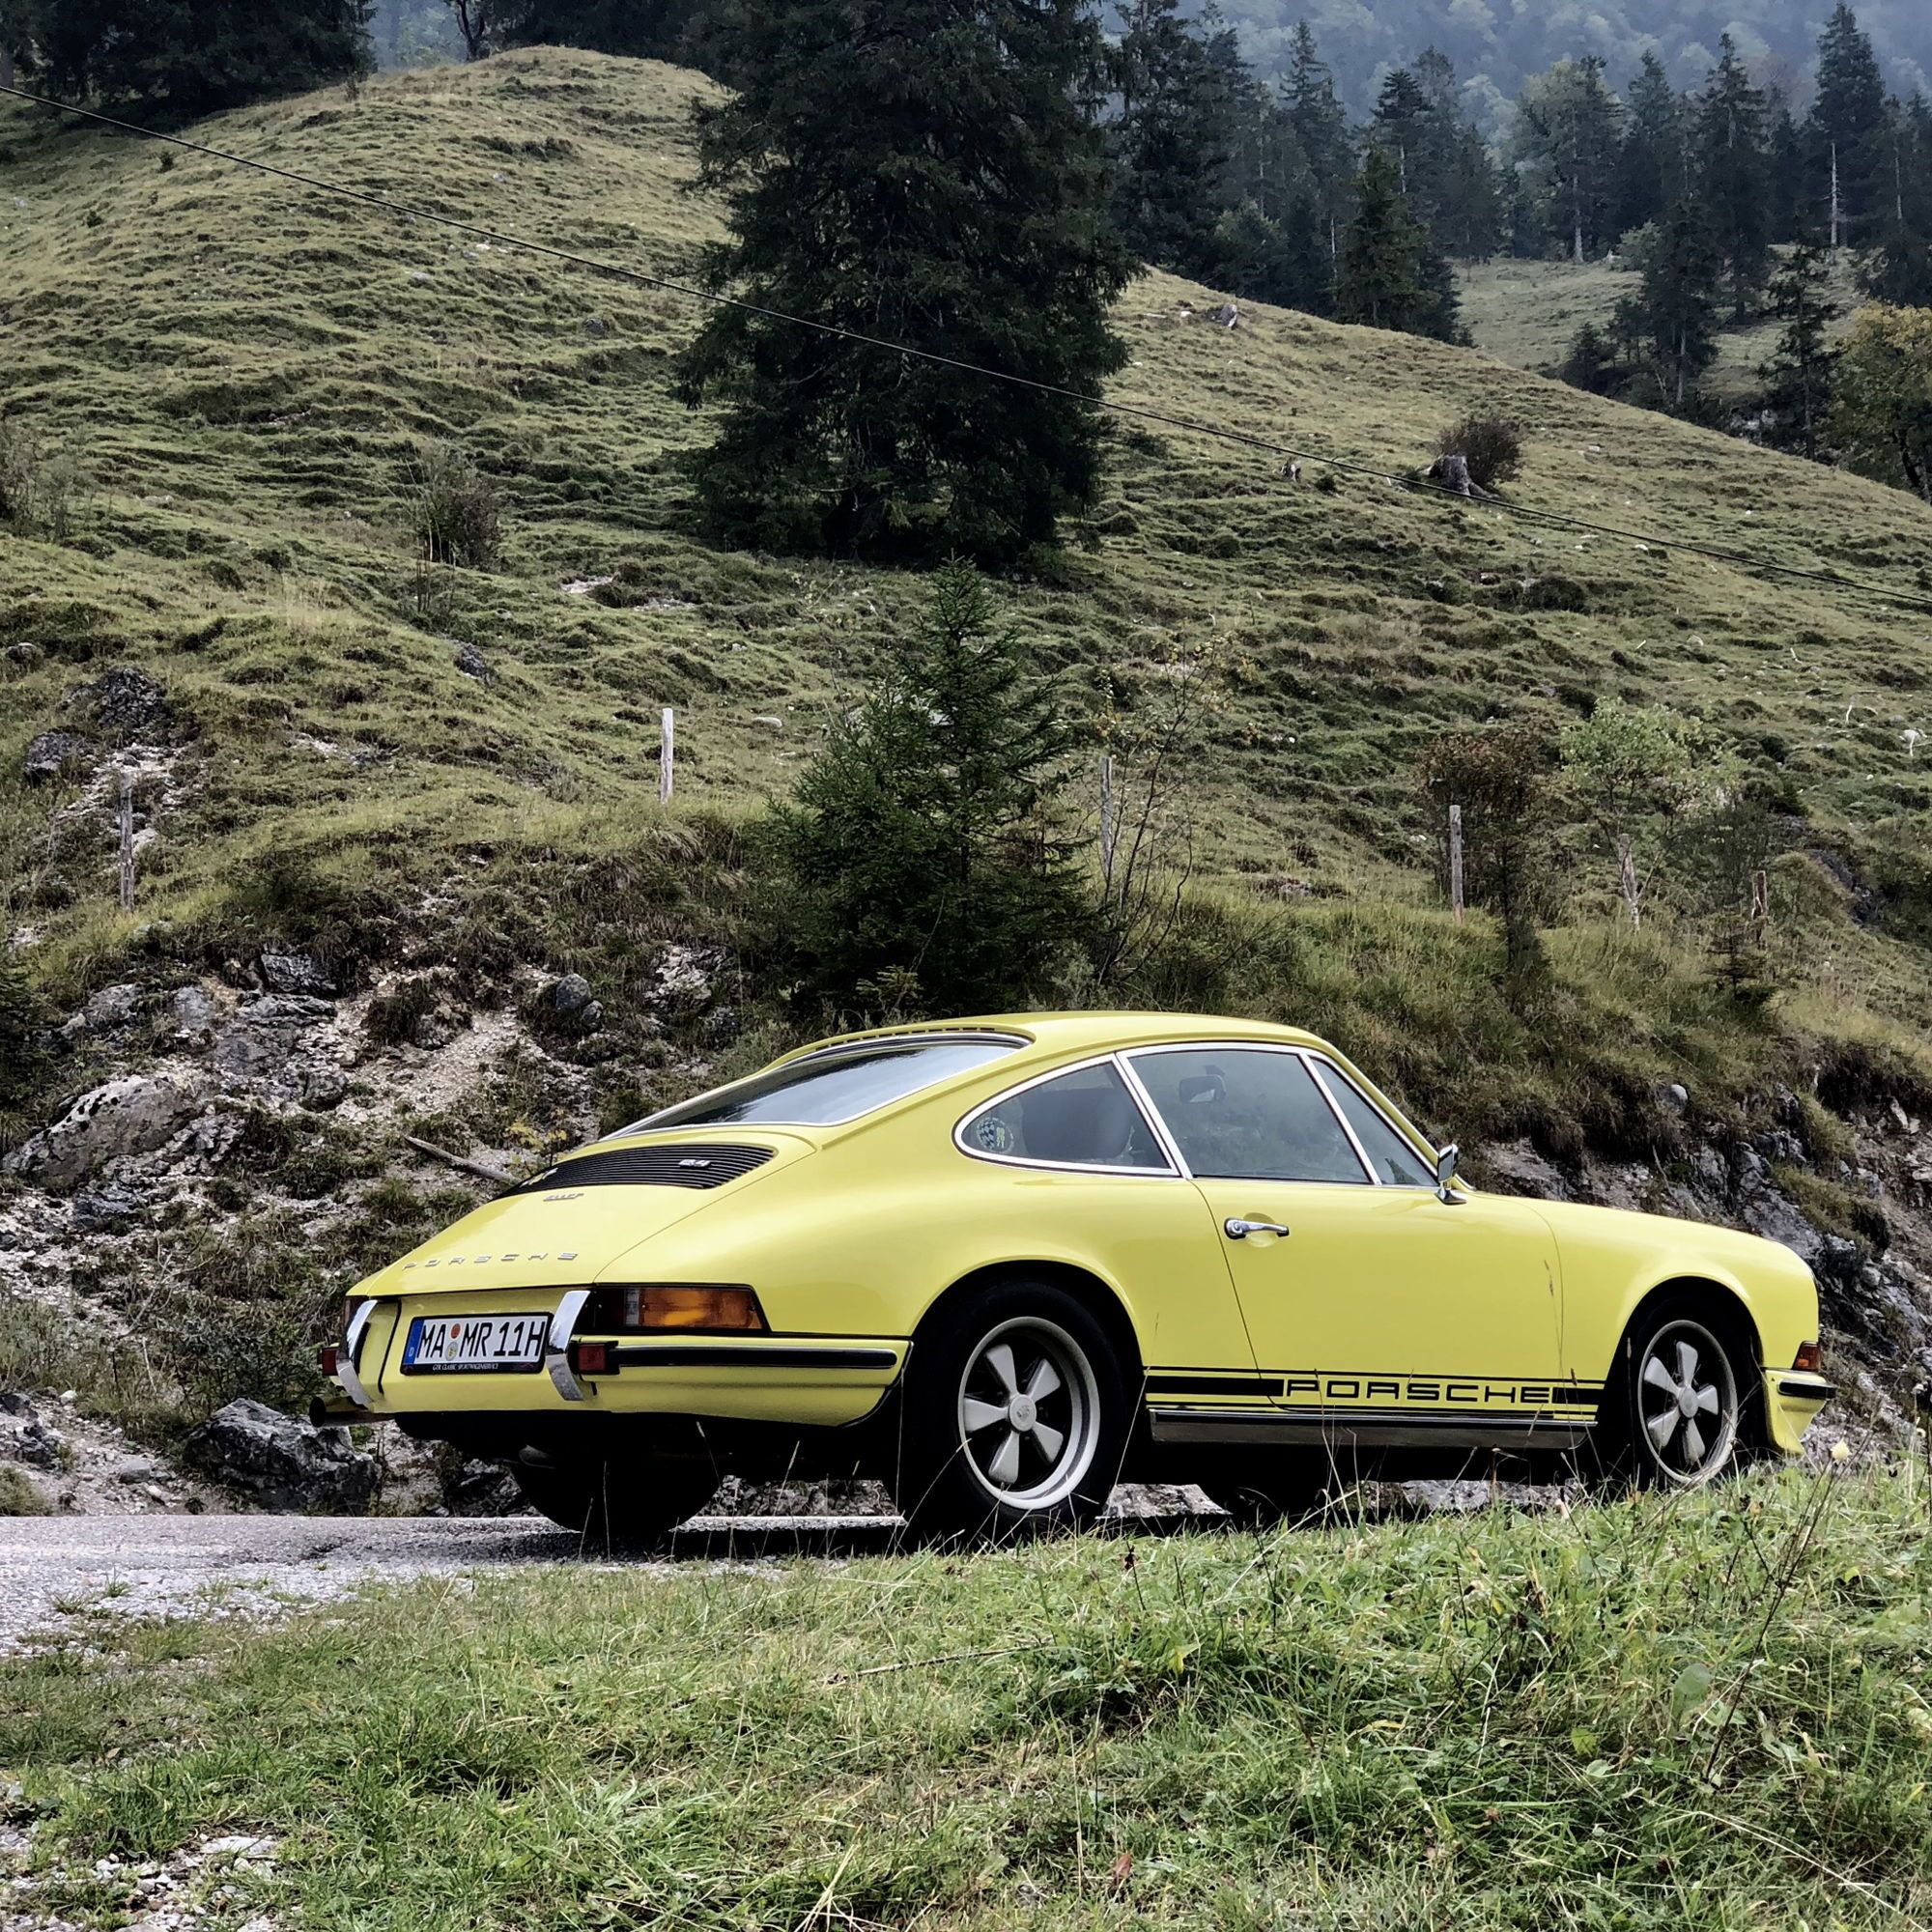 Rear view of yellow 911 F Model parked in woodland